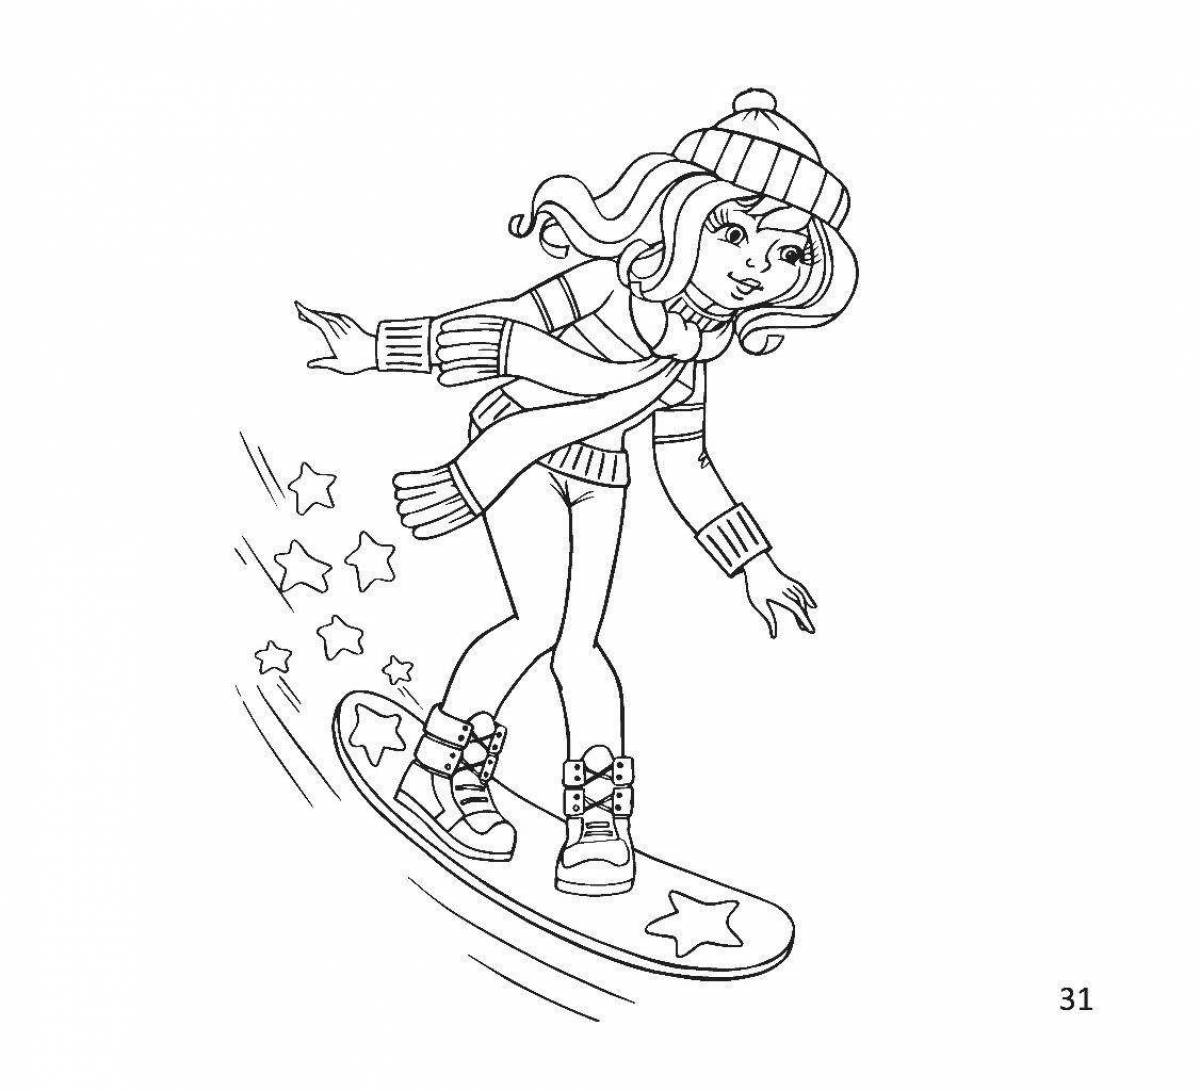 Playful winter sports coloring page for kindergarten